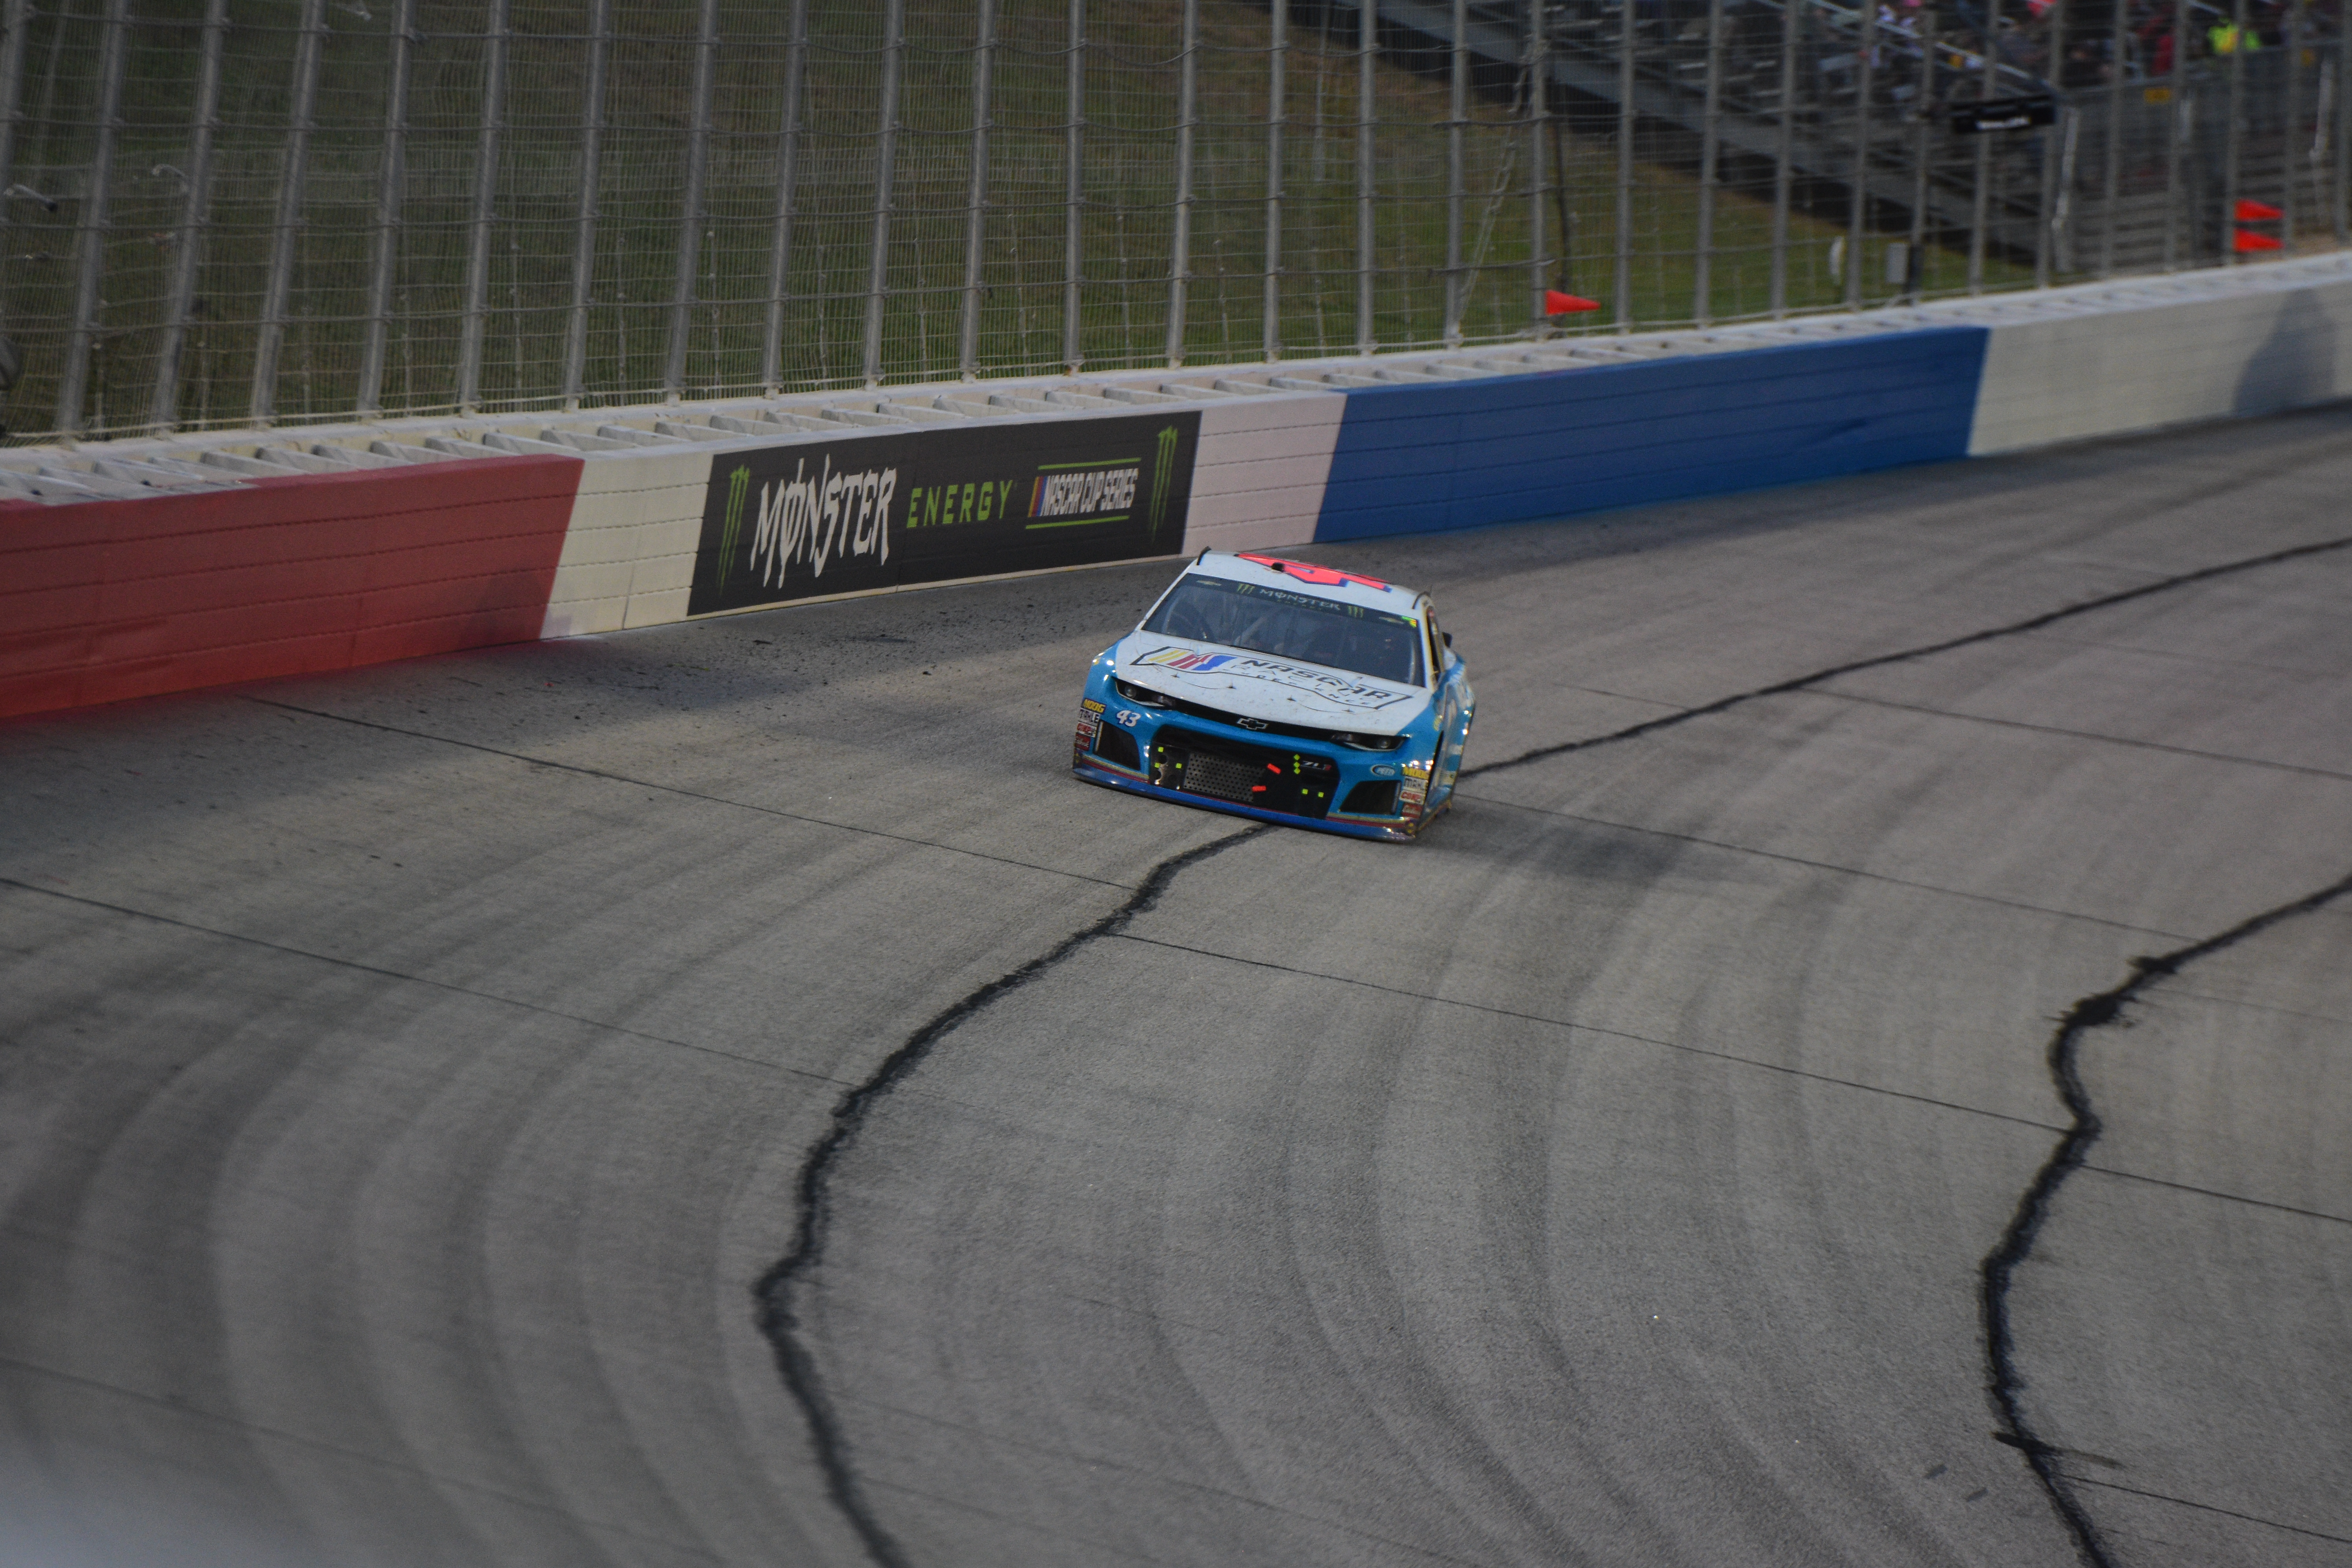 Bubba Wallace was having a decent day at Atlanta until late race problems. (Photo Credit: Zach Darrow/TPF)